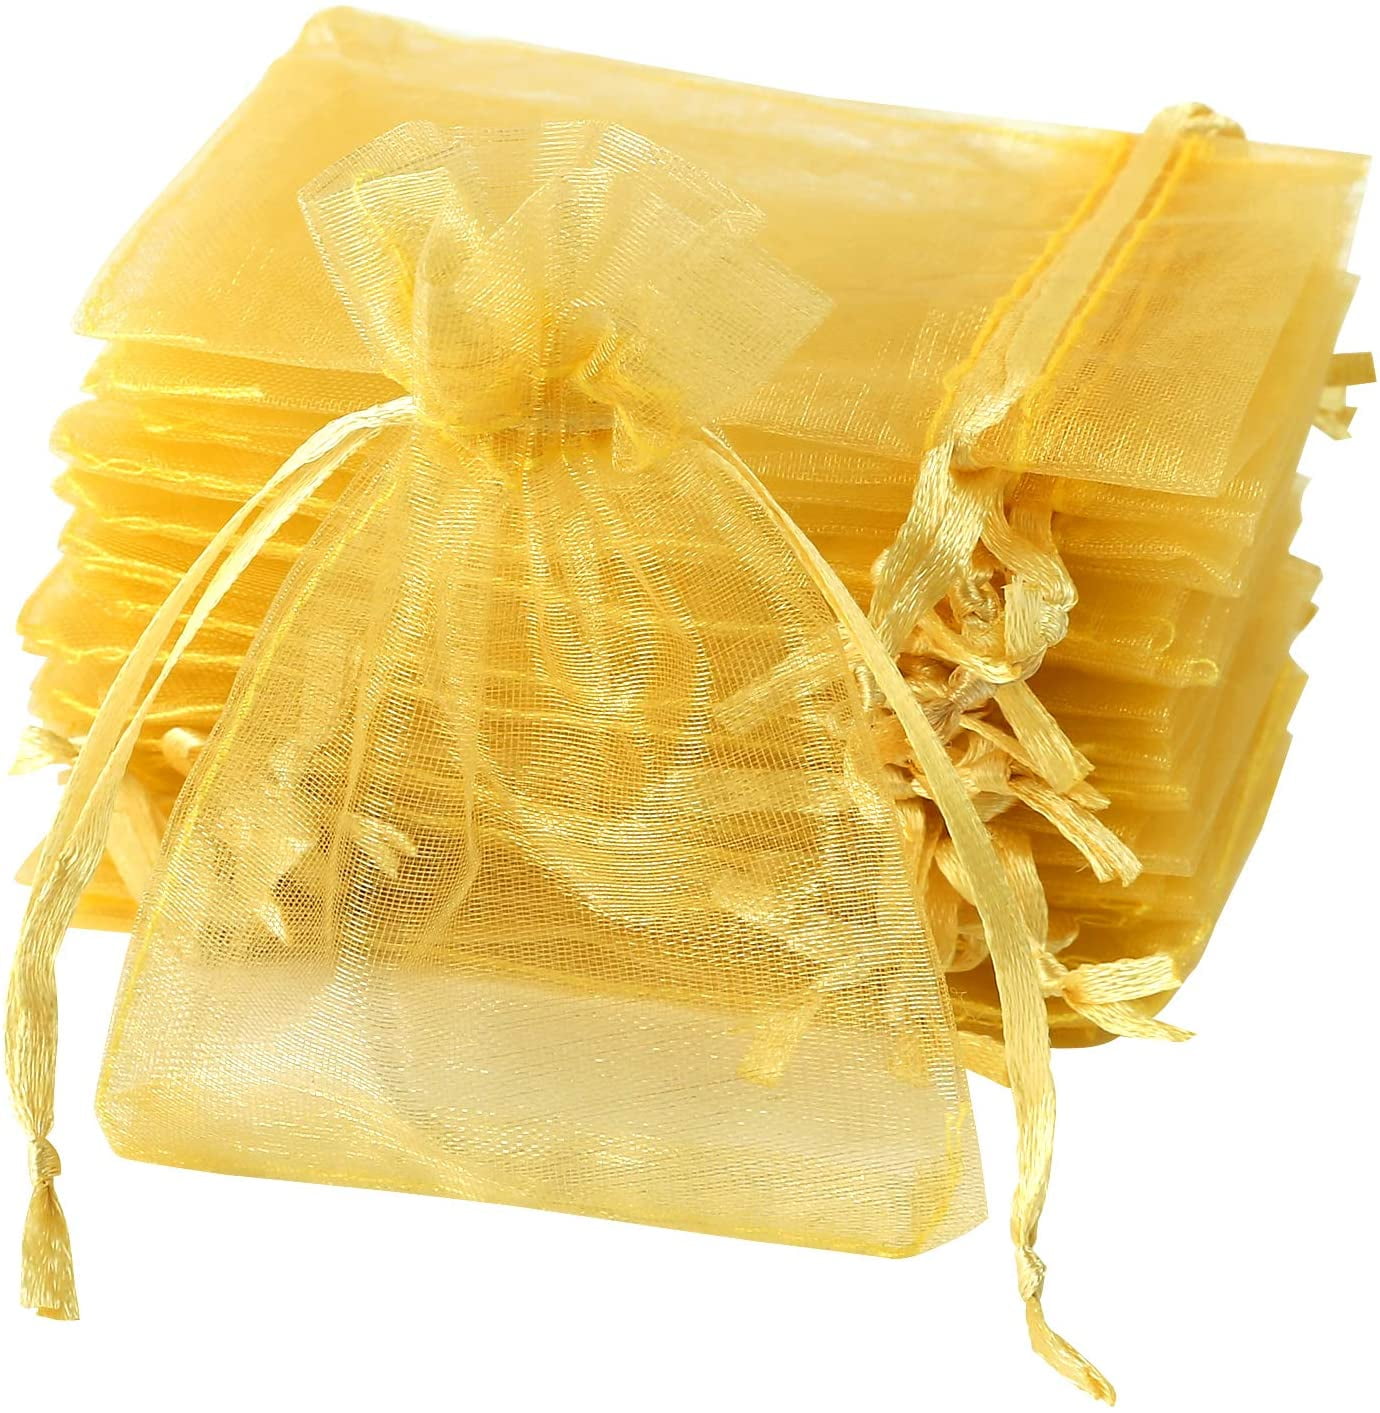 Sheer Drawstring Organza Bags Jewelry Pouches Wedding Favor Gift Party Bag . 